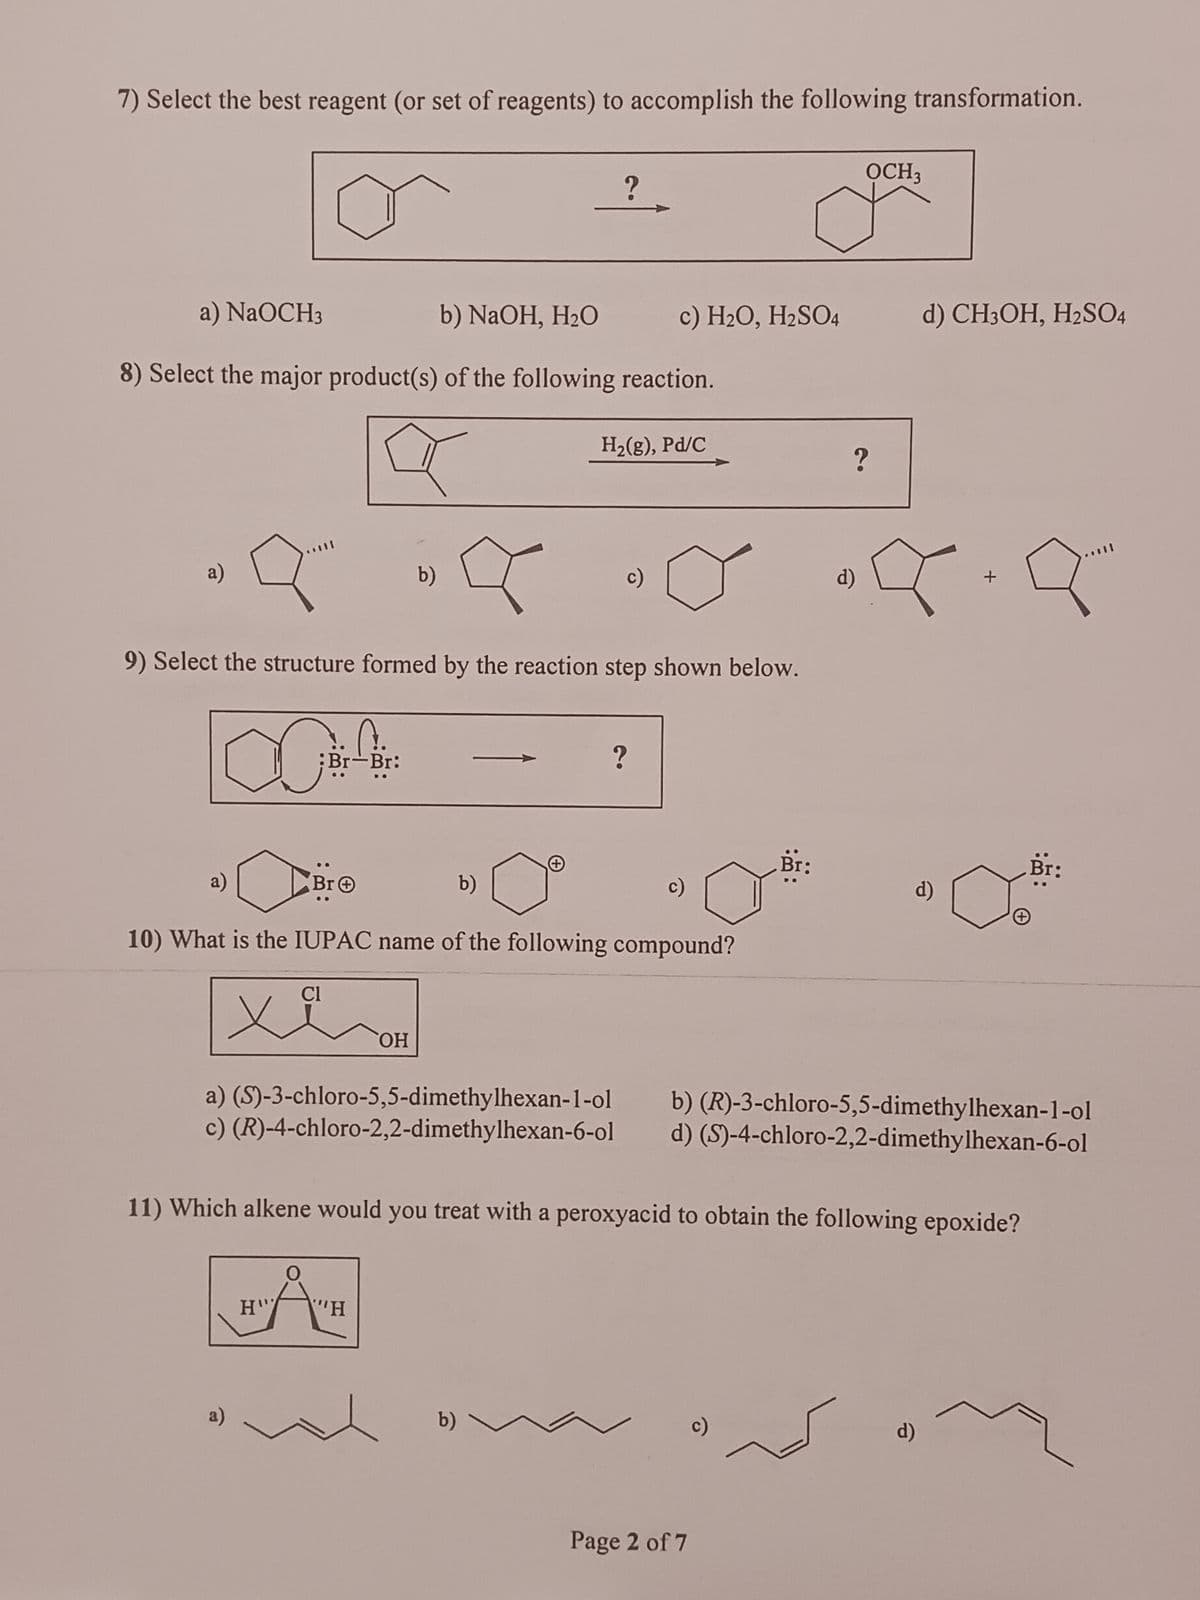 7) Select the best reagent (or set of reagents) to accomplish the following transformation.
a) NaOCH3
b) NaOH, H₂O
8) Select the major product(s) of the following reaction.
a)
∞
9
9) Select the structure formed by the reaction step shown below.
a)
a)
C.
Br-Br:
Cl
H'
O
b)
OH
?
"H
Br Ⓒ
10) What is the IUPAC name of the following compound?
b)
H₂(g), Pd/C
b)
c) H₂O, H₂SO4
c)
?
c)
Br:
Page 2 of 7
c)
OCH3
?
d)
a) (S)-3-chloro-5,5-dimethylhexan-1-ol b) (R)-3-chloro-5,5-dimethylhexan-1-ol
c) (R)-4-chloro-2,2-dimethylhexan-6-ol d) (S)-4-chloro-2,2-dimethylhexan-6-ol
11) Which alkene would you treat with a peroxyacid to obtain the following epoxide?
d) CH3OH, H2SO4
d)
d)
+
q
+
Br: